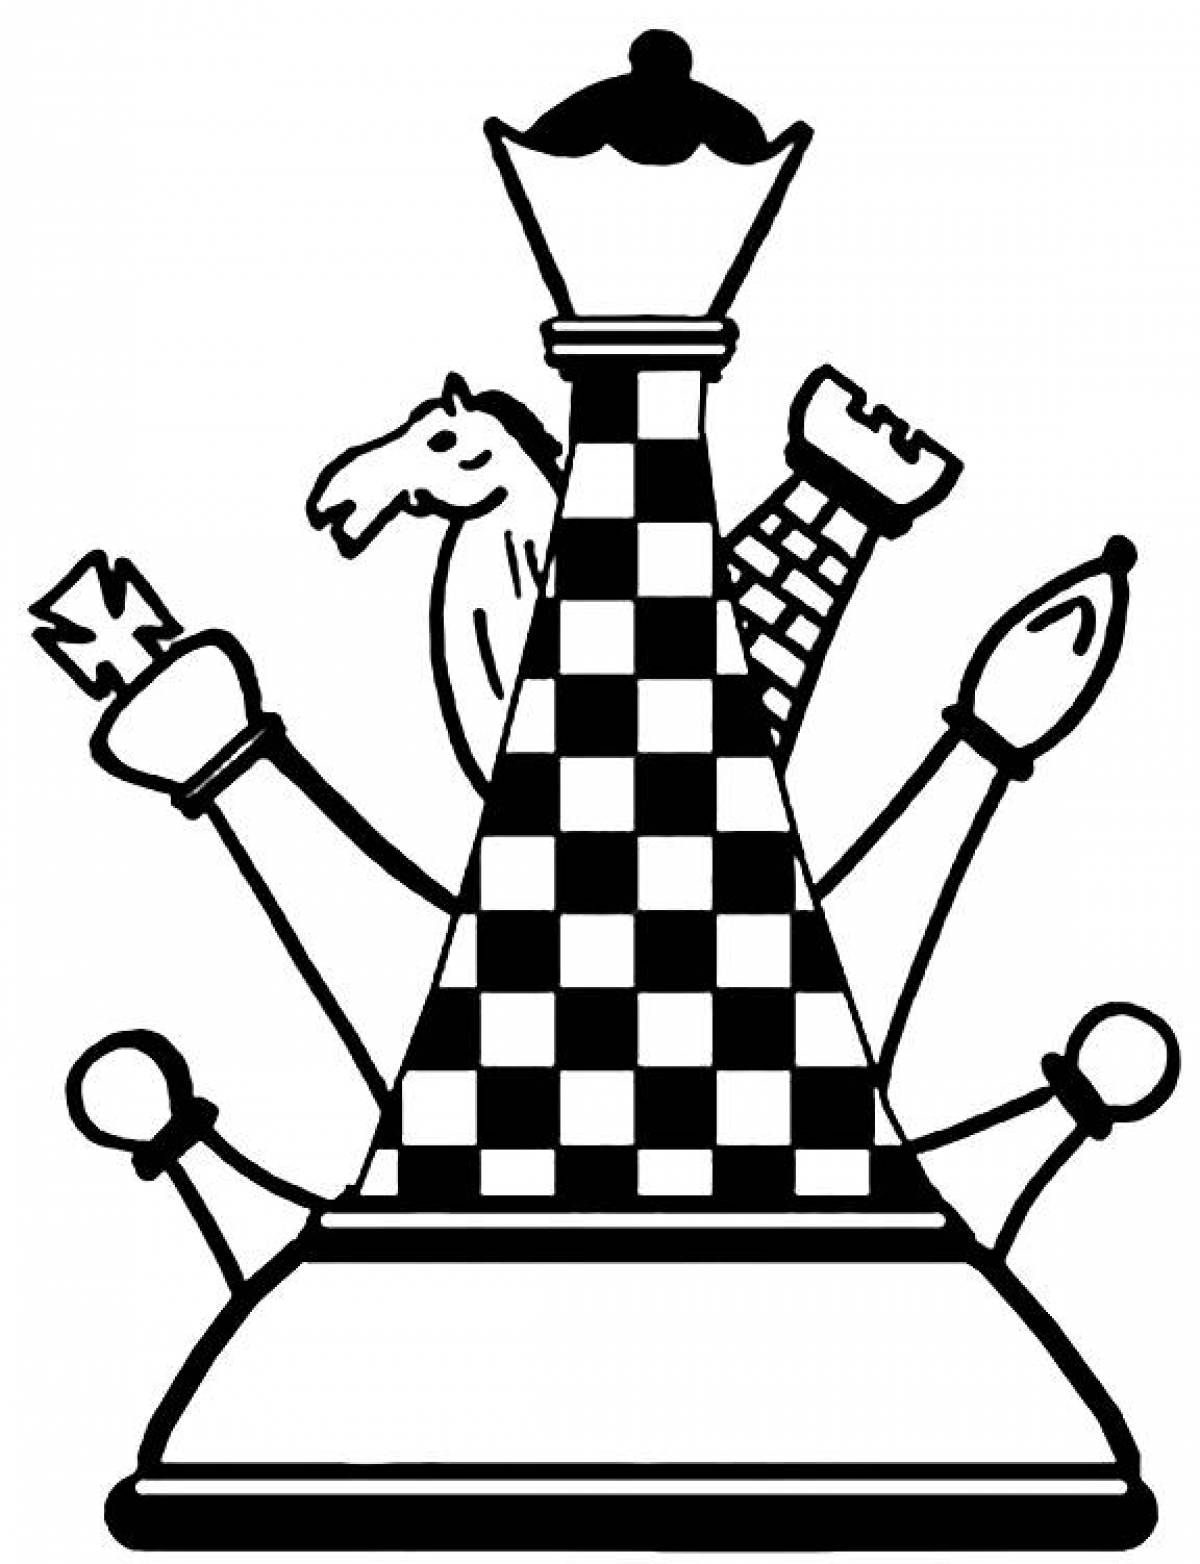 Dazzling chess coloring